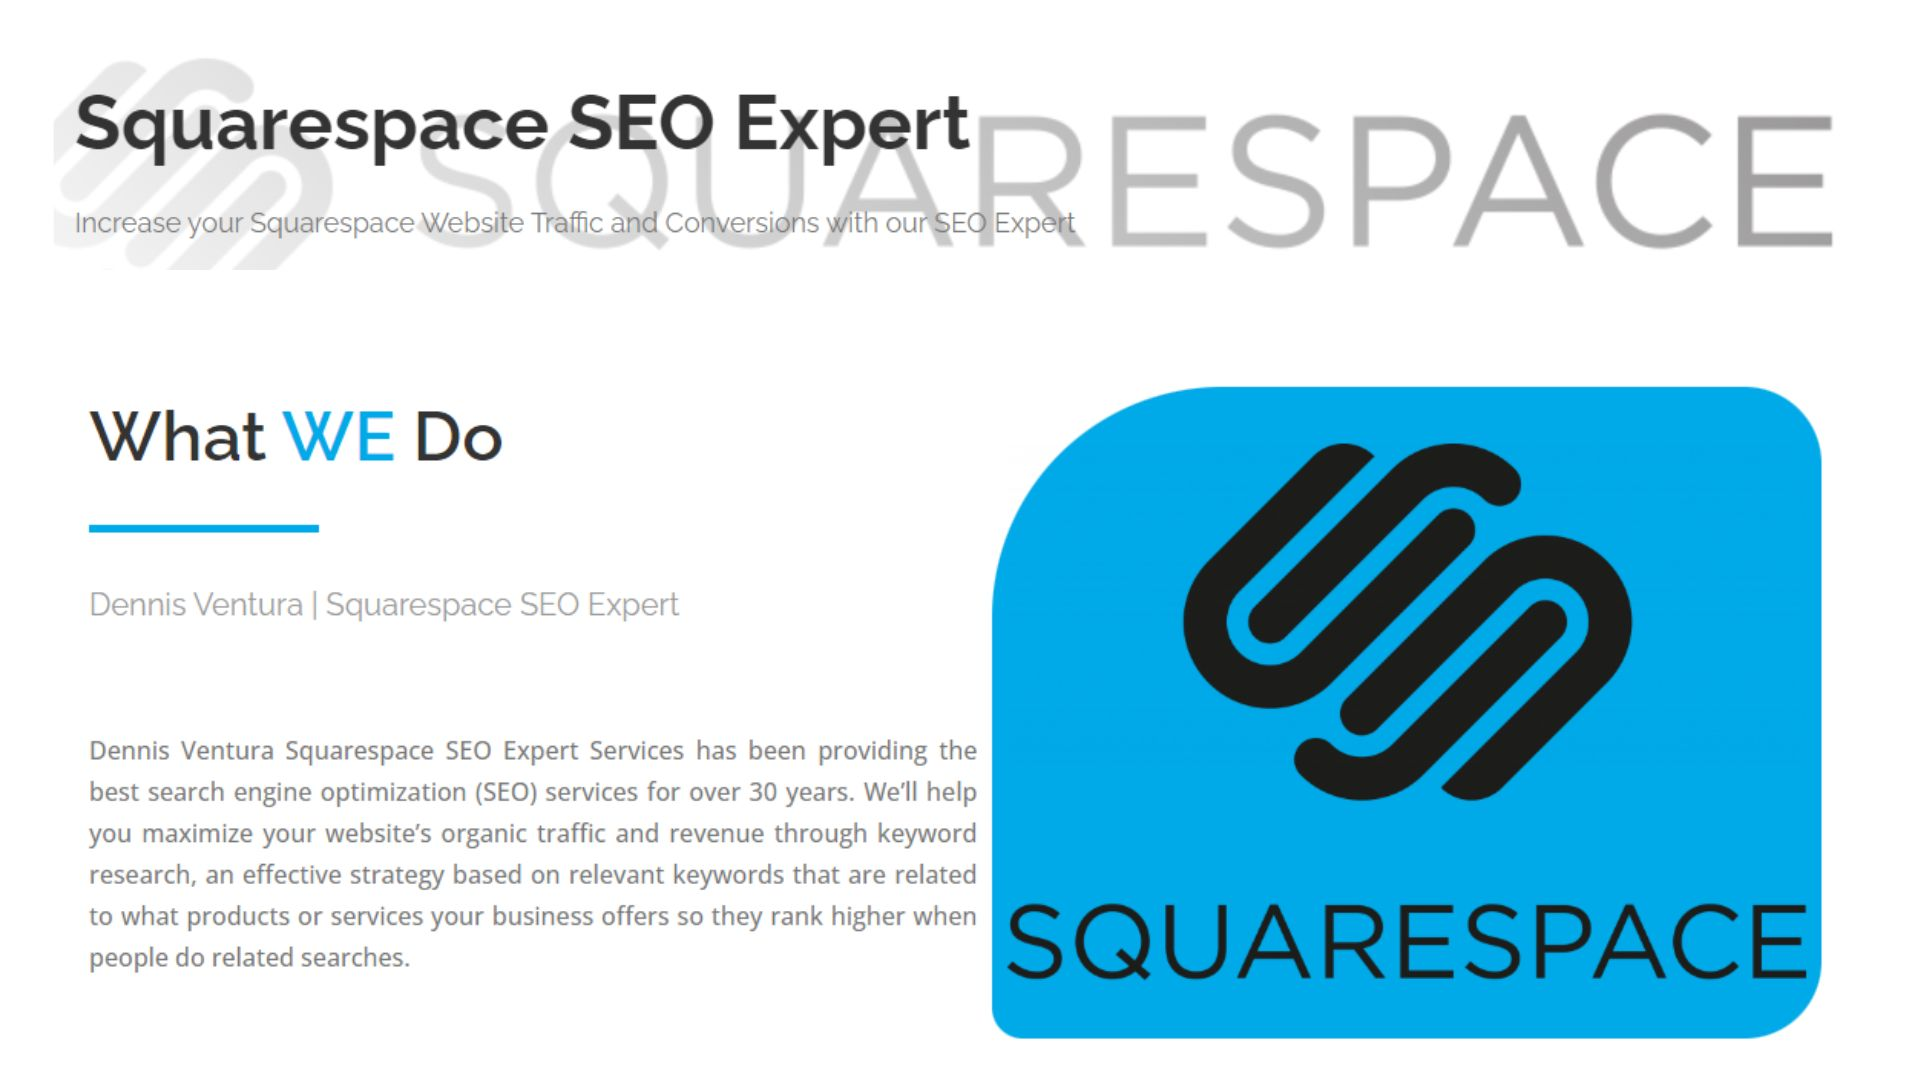 What Exactly Is A Squarespace SEO?